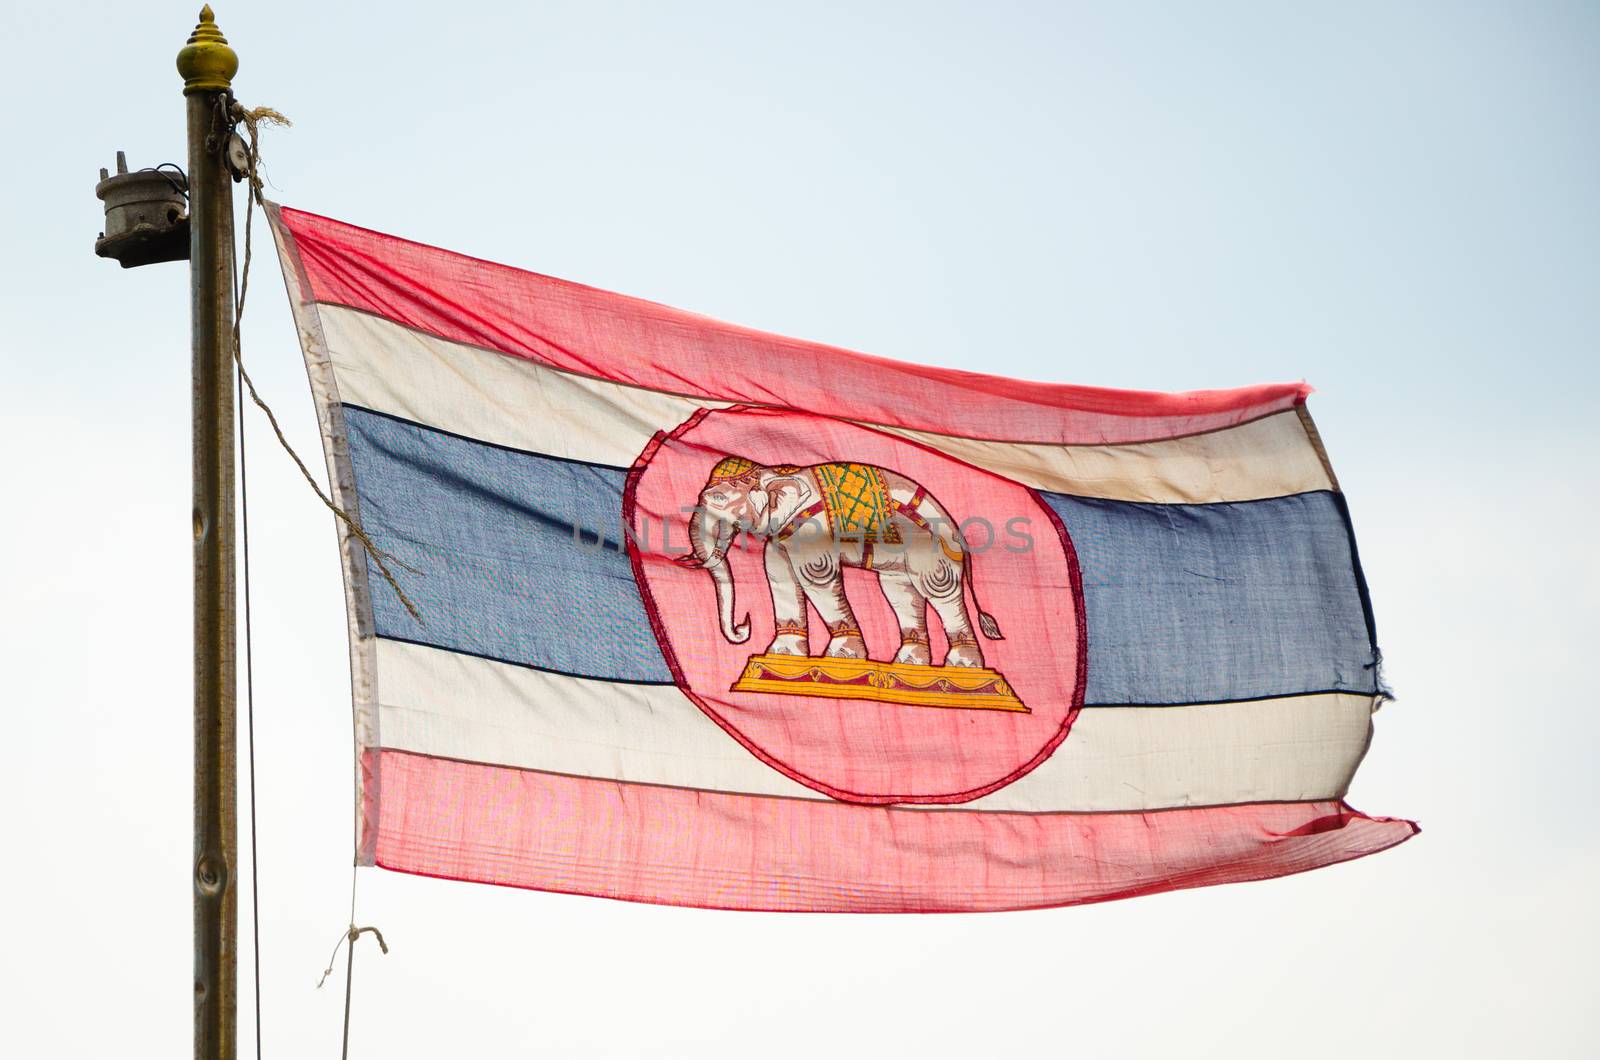 Navy Flag of Thailand in the past